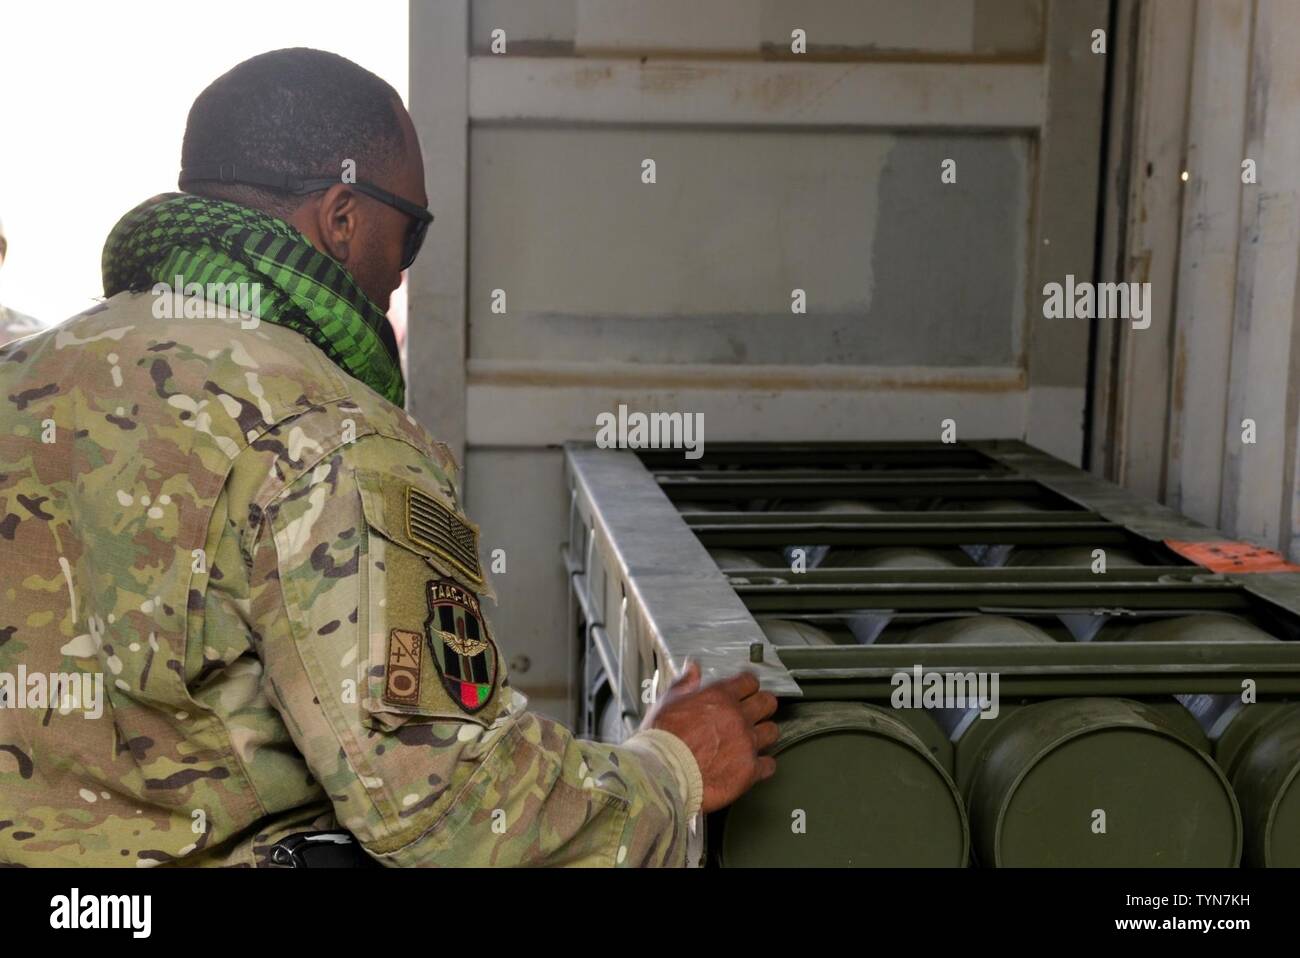 Master Sgt. Rick Page, Train, Advise, Assist Command-Air (TAAC-Air) occupational safety advisor, looks at weapons stored in a facility at Mazar-e-Sharif, Afghanistan, Nov. 17, 2016. Page traveled from Hamid Karzai International Airport to perform a site visit and discuss upcoming munitions field depot construction with the Army Corps of Engineers. Stock Photo